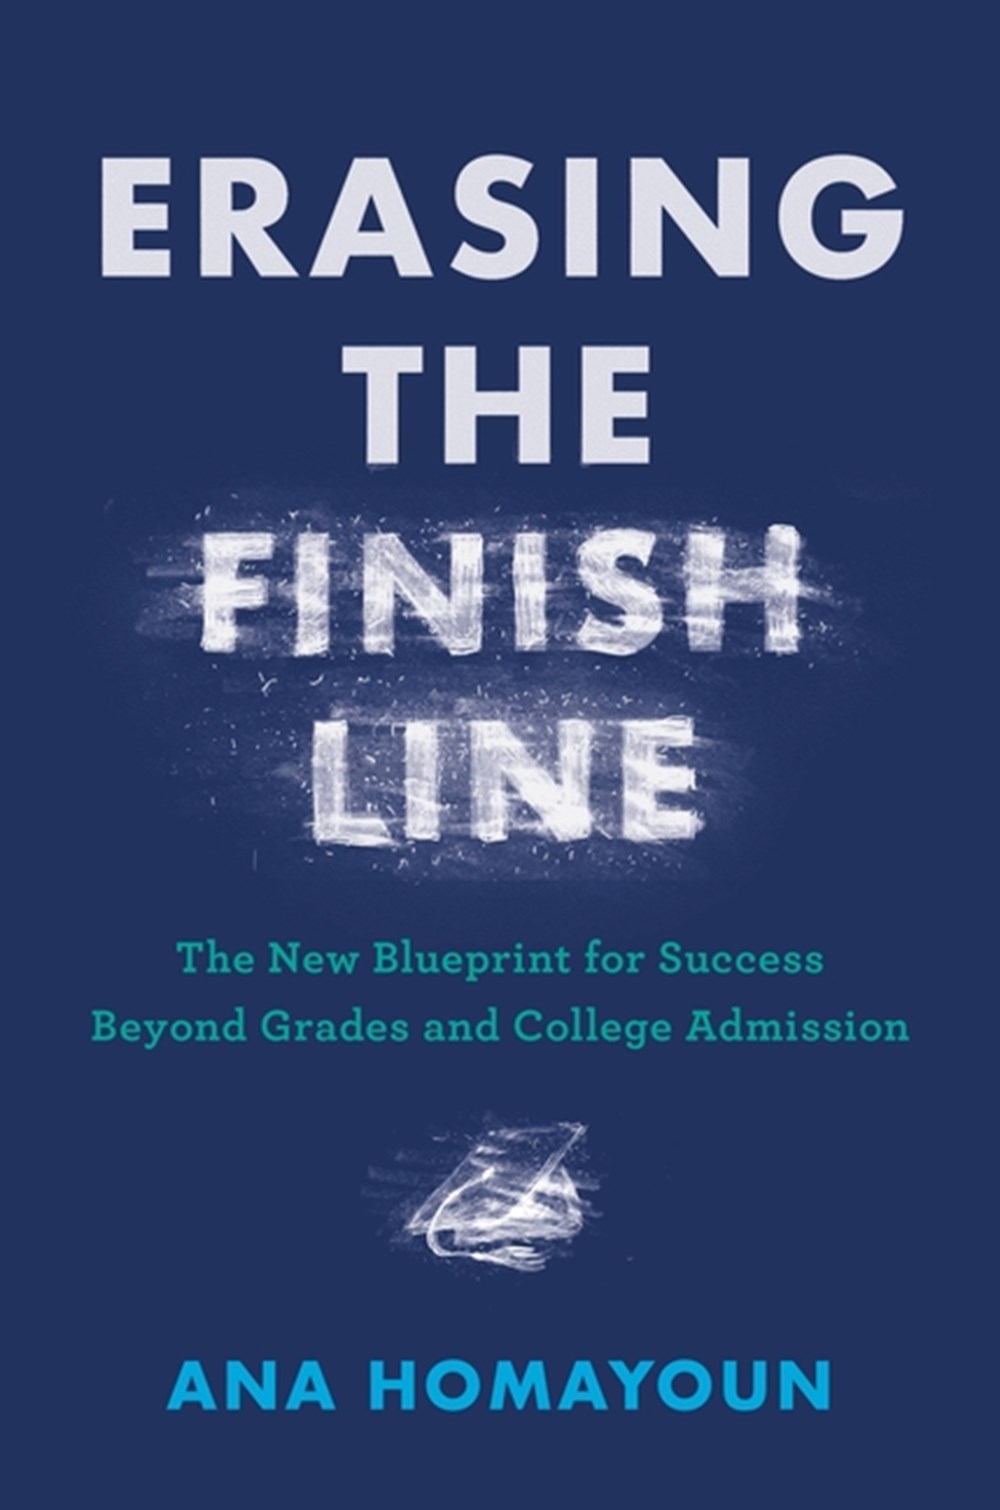 Erasing the Finish Line: The New Blueprint for Success Beyond Grades and College Admission